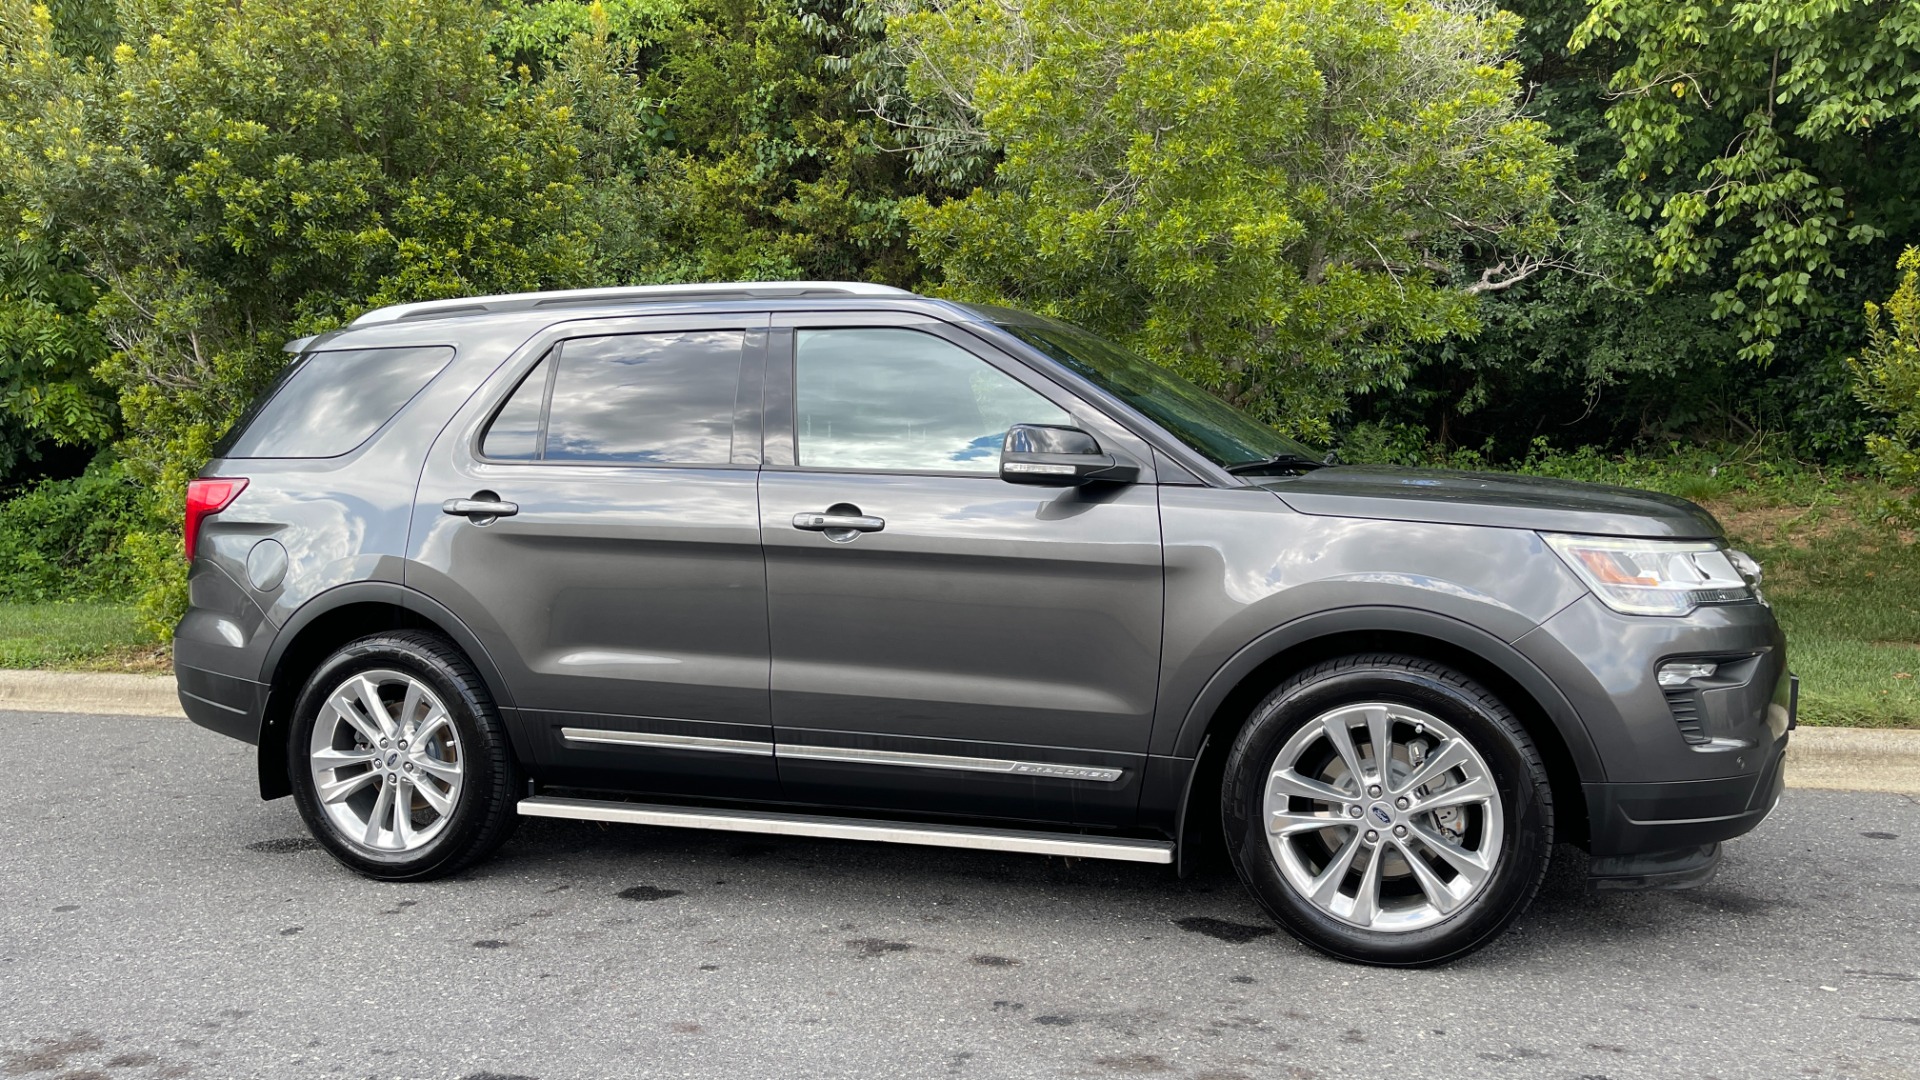 Used 2018 Ford Explorer XLT / REMOTE START / LEATHER / 3RD ROW / 20IN WHEELS for sale $31,495 at Formula Imports in Charlotte NC 28227 4